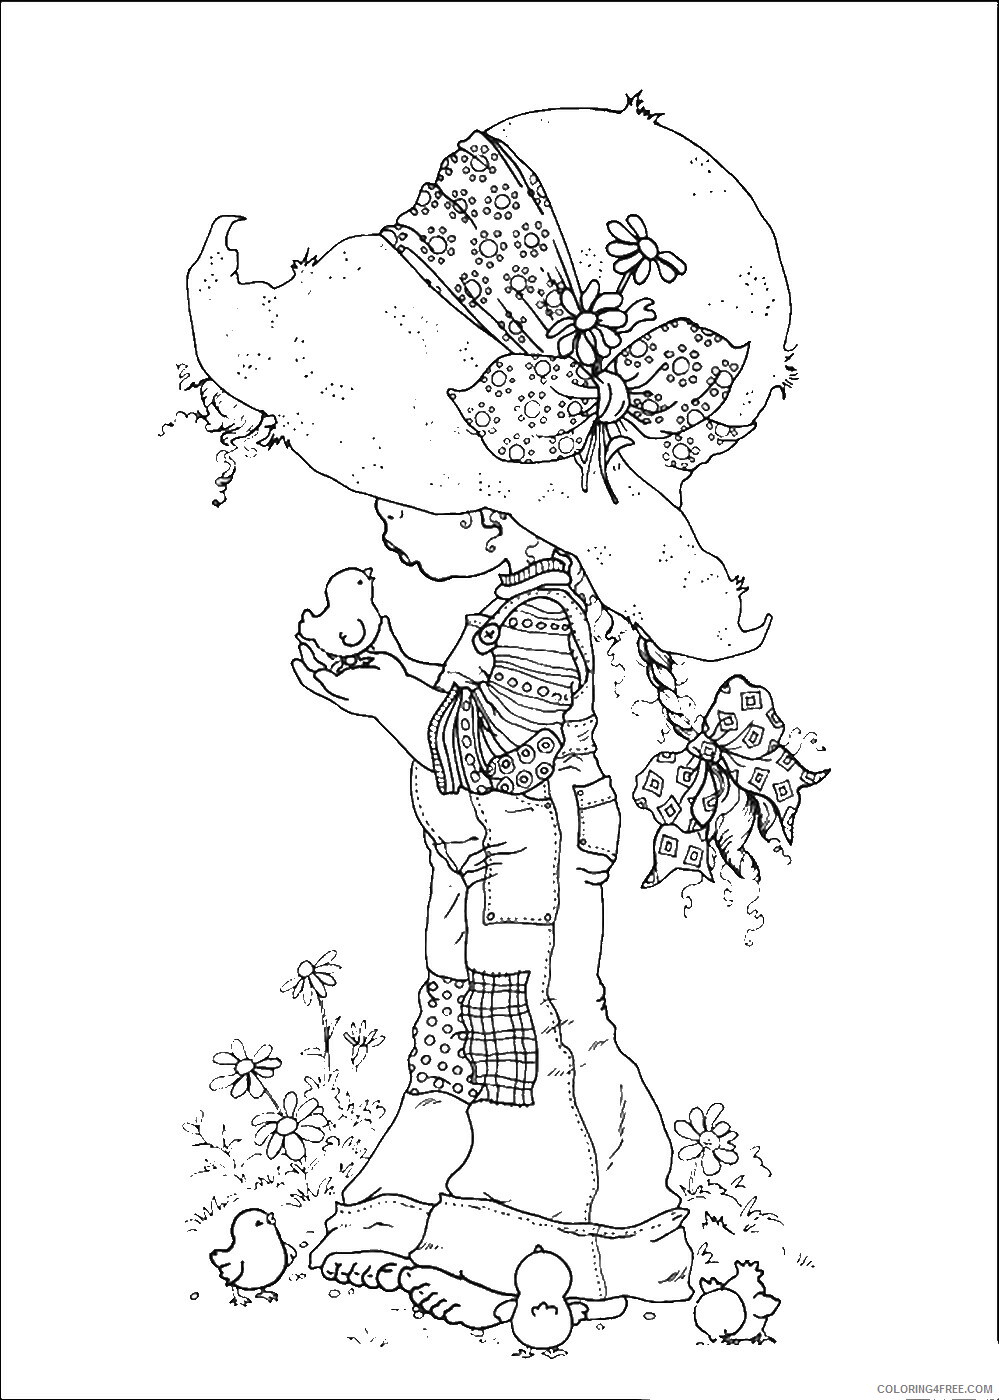 Doll Coloring Pages for Girls dolls_44 Printable 2021 0384 Coloring4free